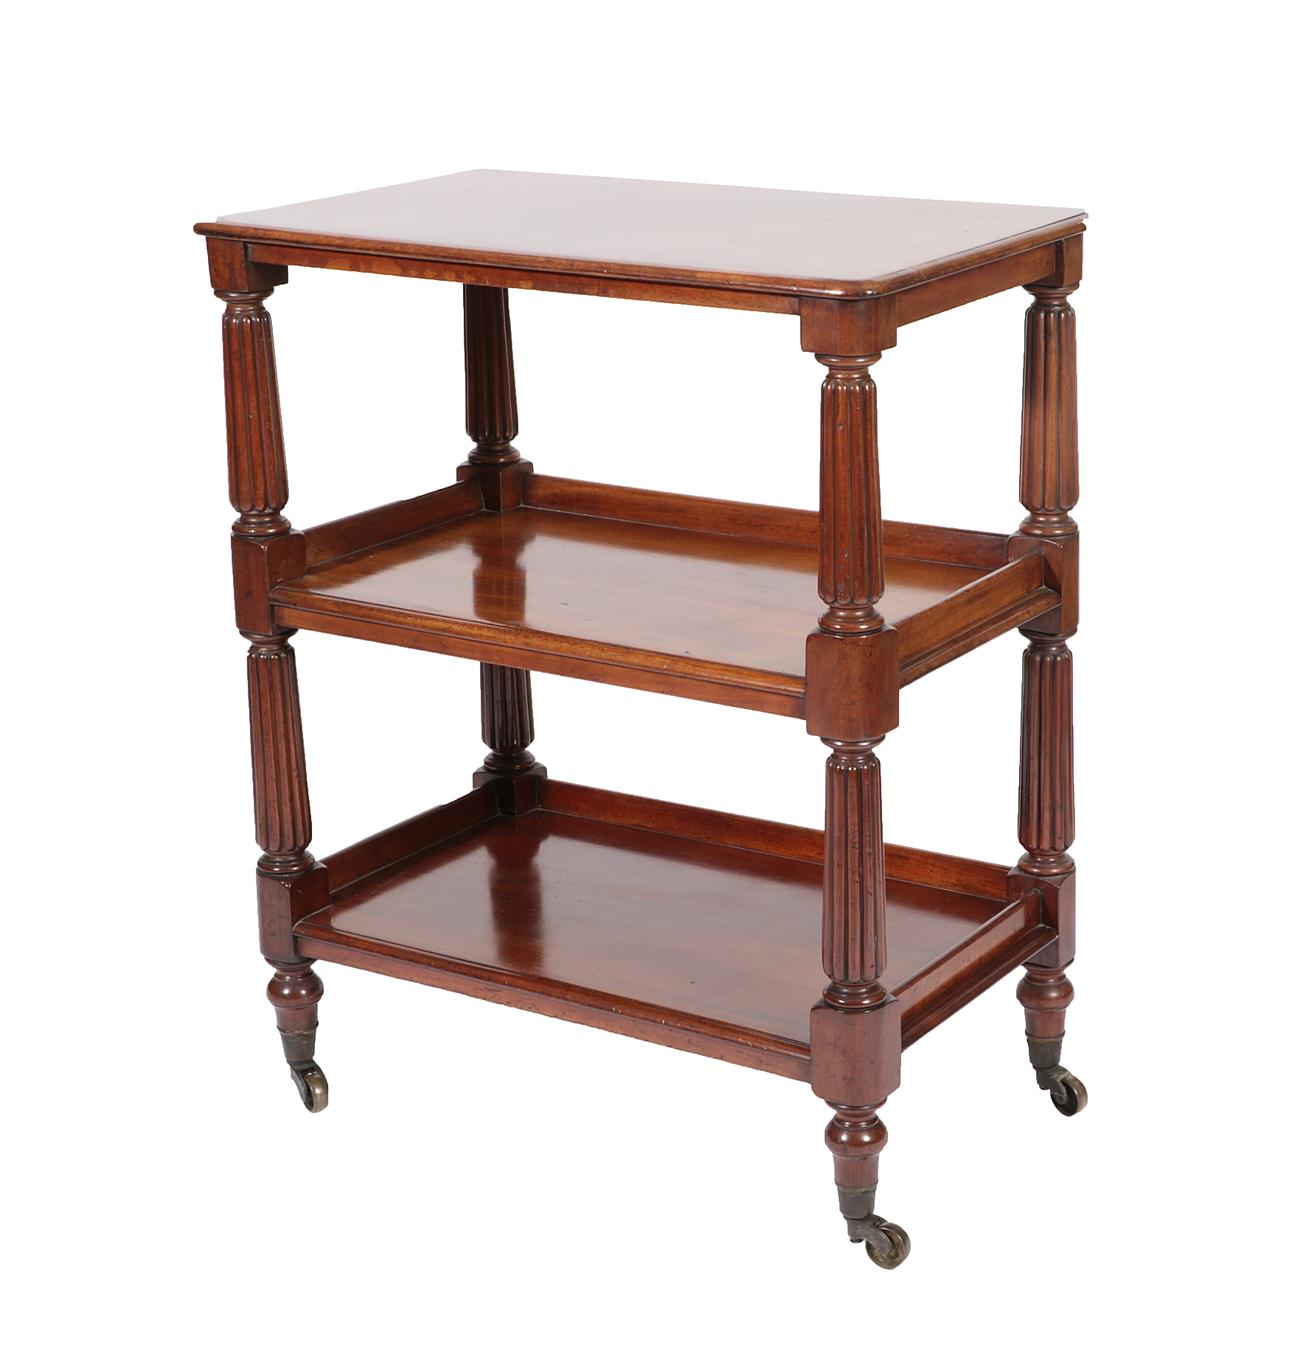 Lot 533 - A Victorian Mahogany Three-Tier Dumb Waiter, mid 19th century, of rectangular form with reeded...